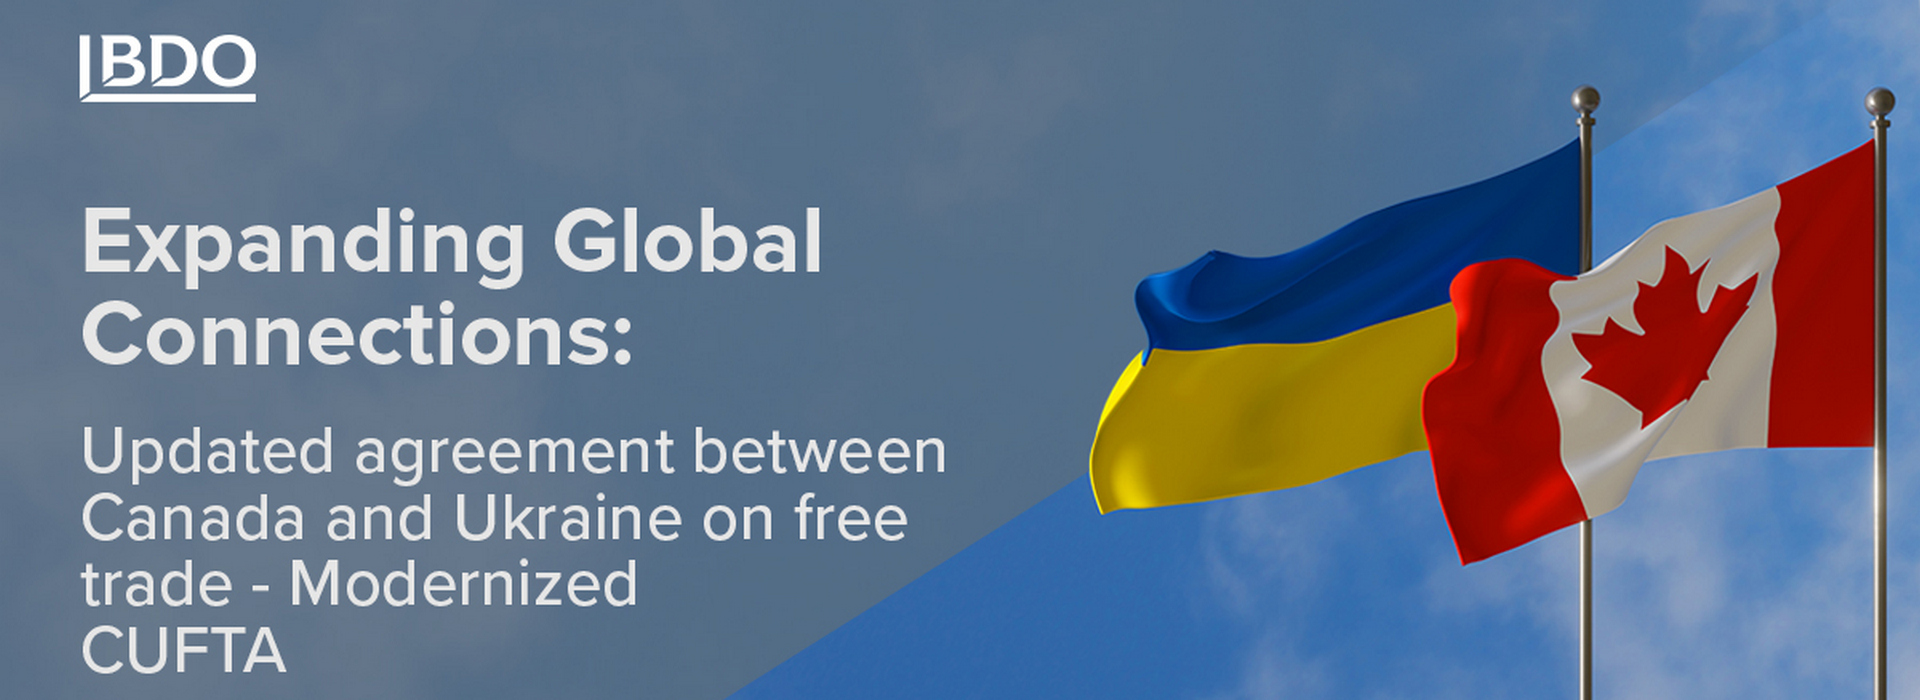 BDO in Ukraine Highlights the Main Aspects of the Updated Free Trade Agreement Between Canada and Ukraine – Modernized CUFTA